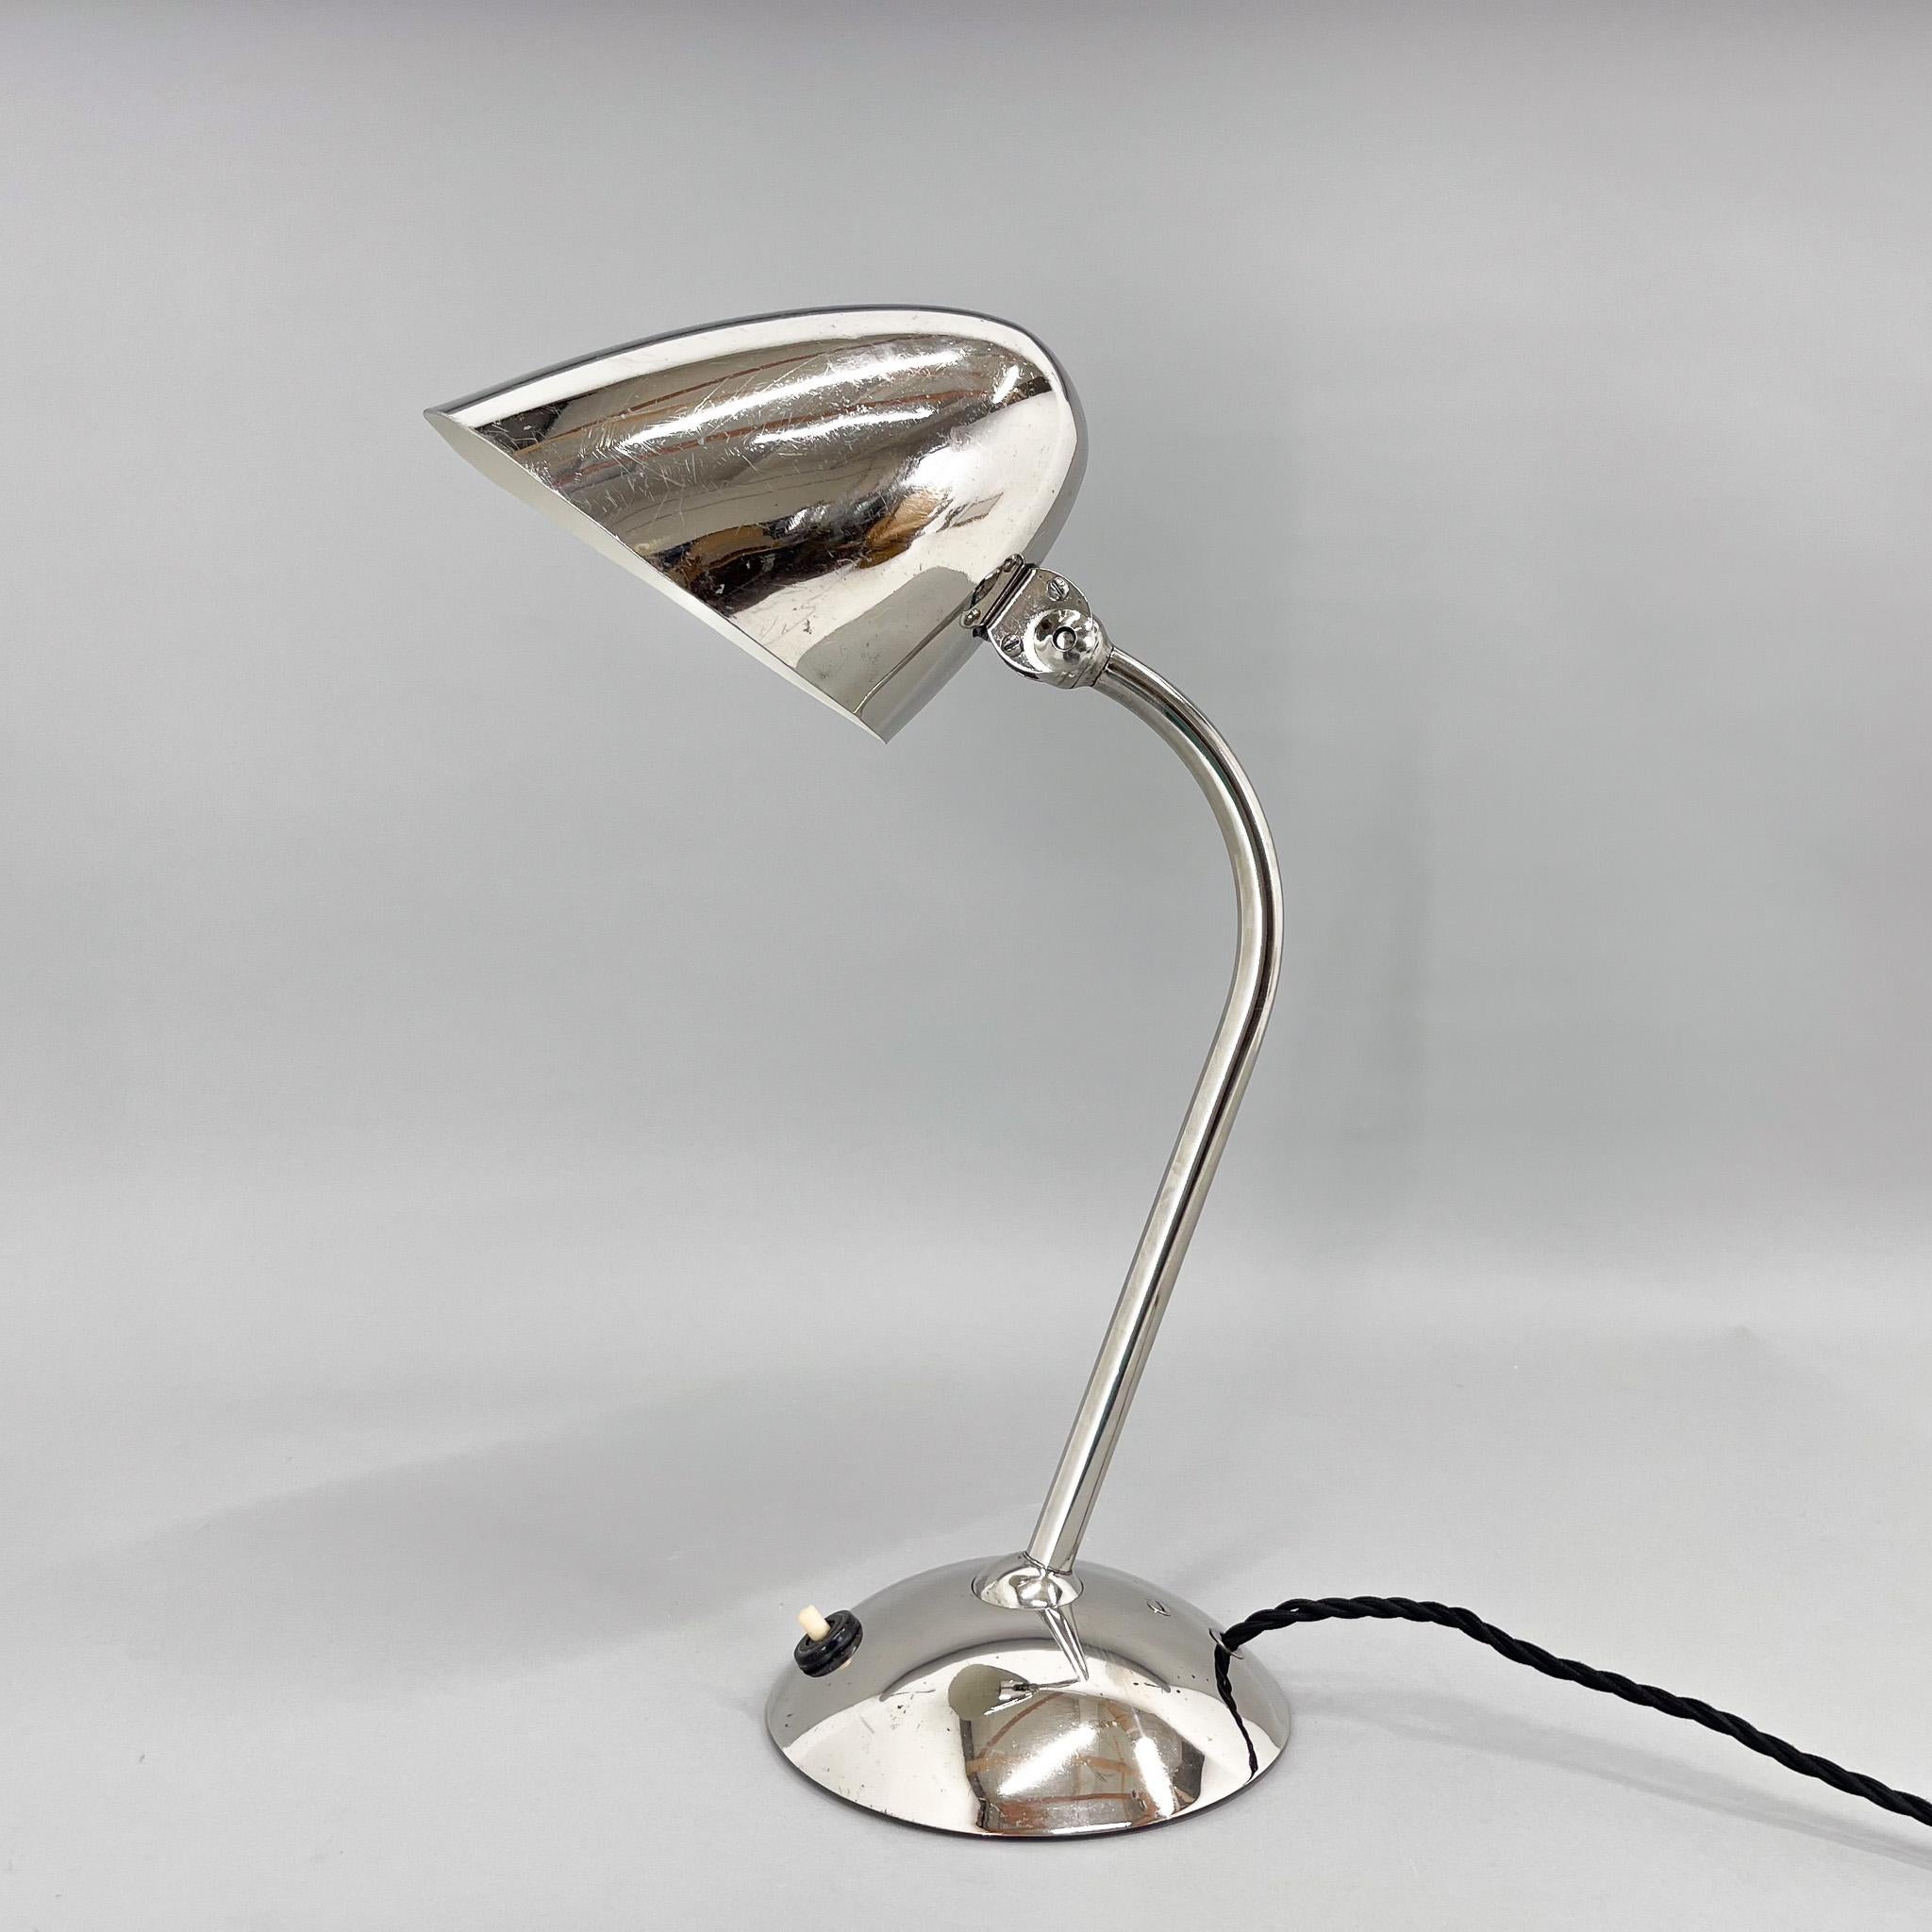 Iconic table lamp by Franta Anyz. Niickel-plated version.
This lamp is famous for its patented Anyz joints that make the shade as flexible as possible. Cleaned, polished. Some scratches on surface.
Rewired:
1x40W, E25-E27 bulb
US plug adapter